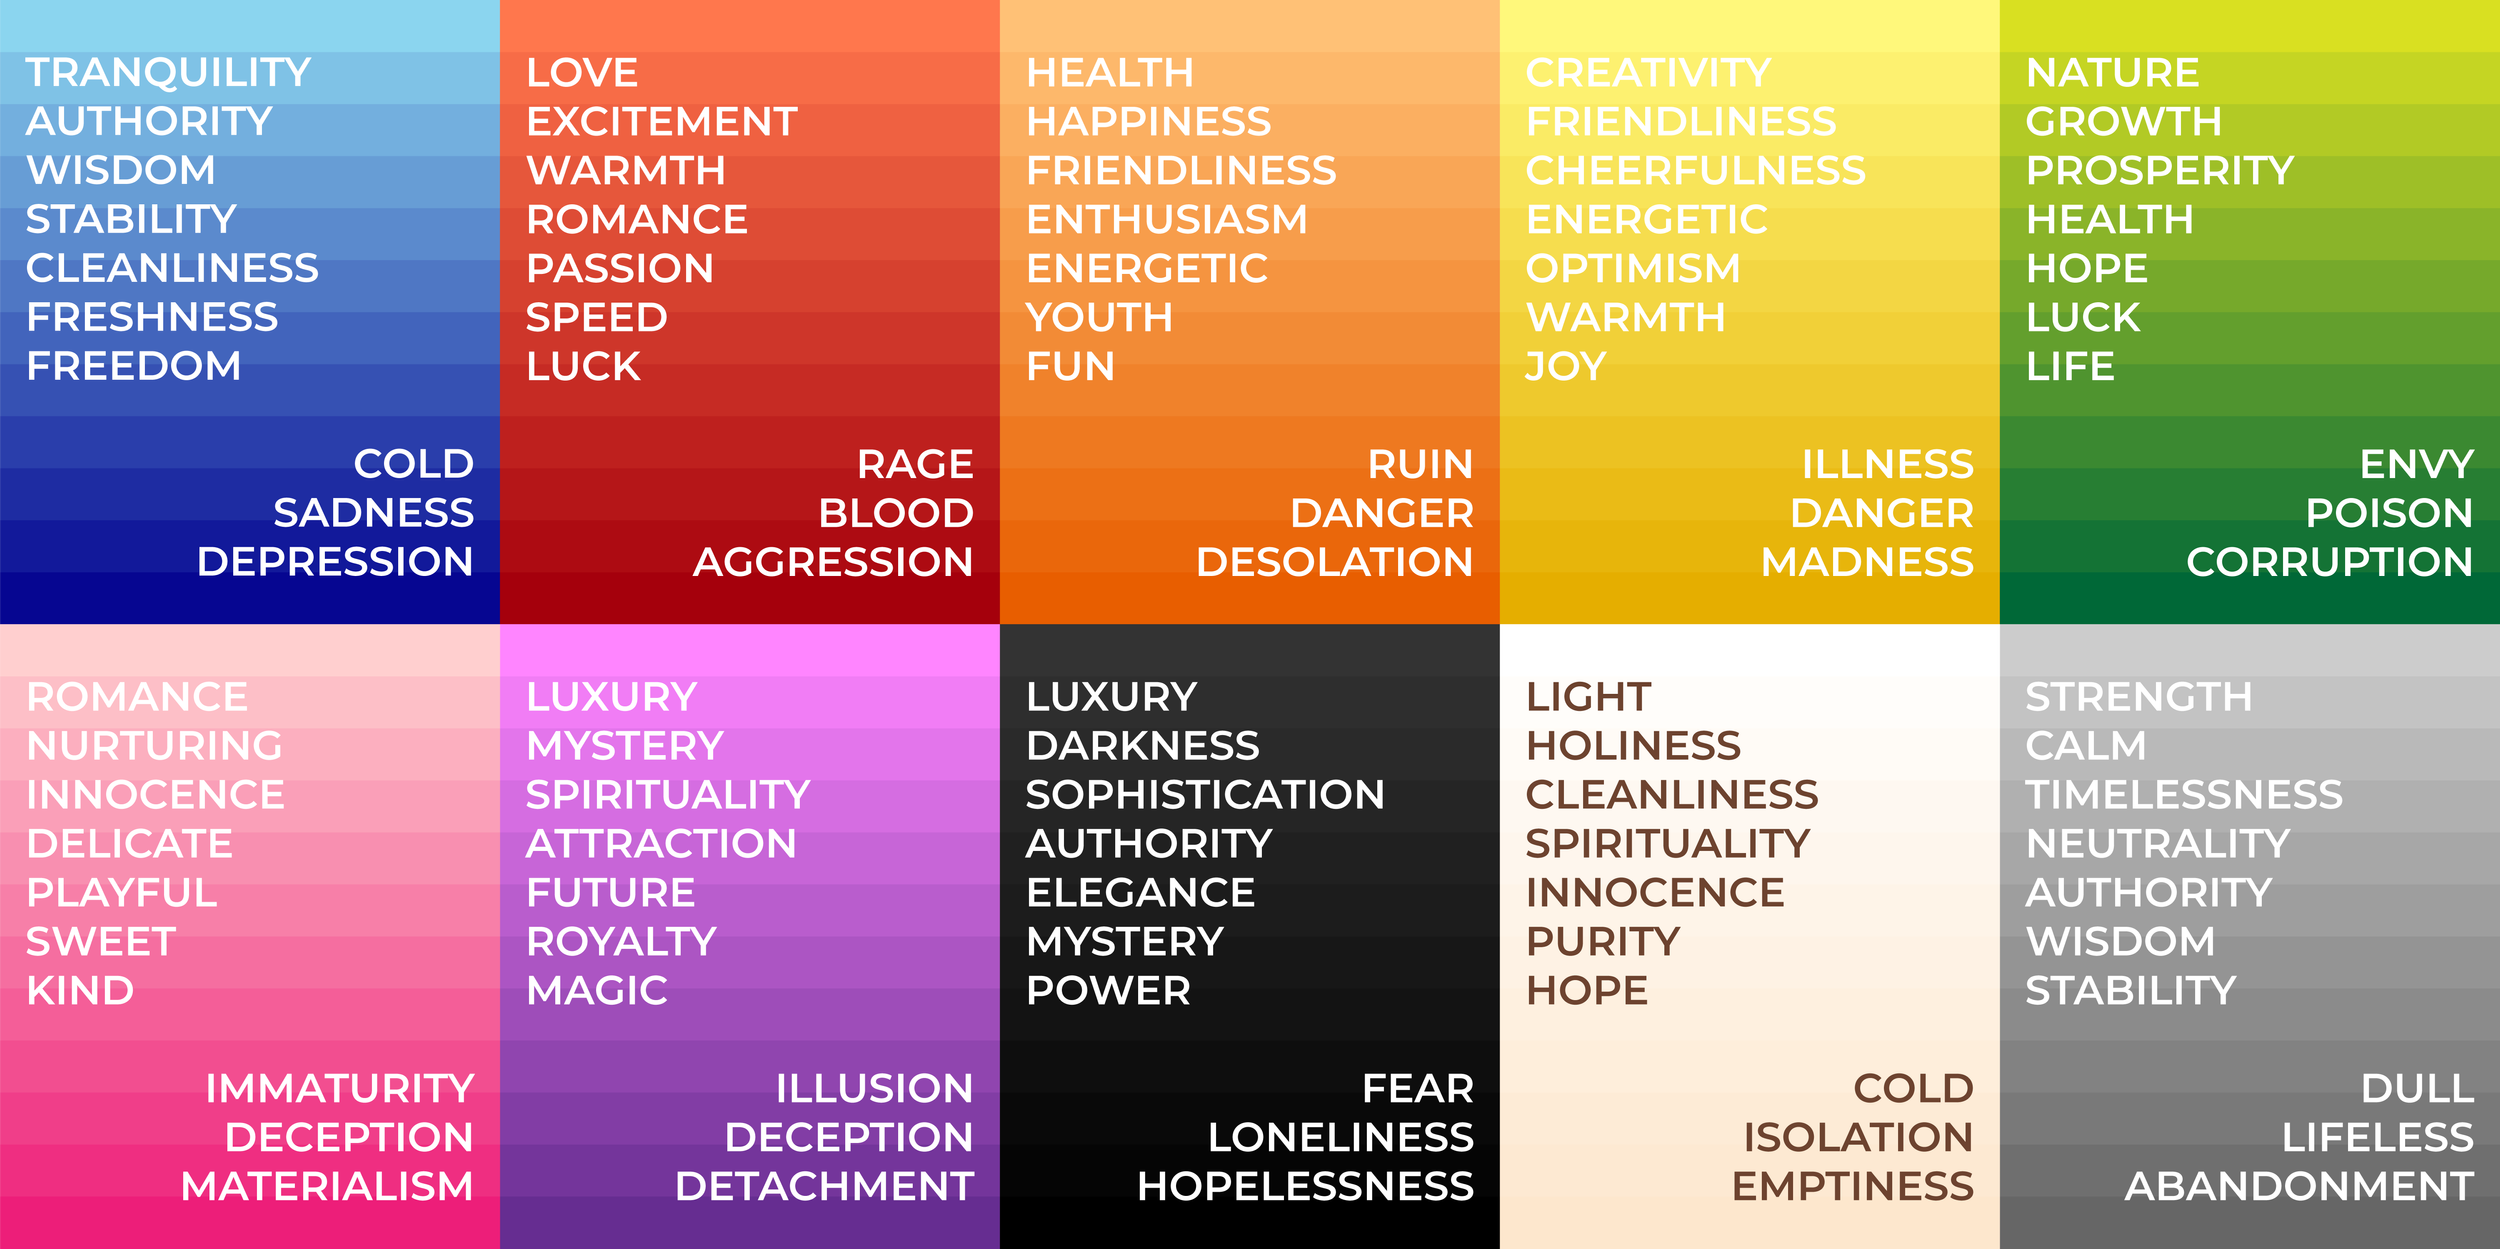 Meaning of the Color White: Psychology and Associations